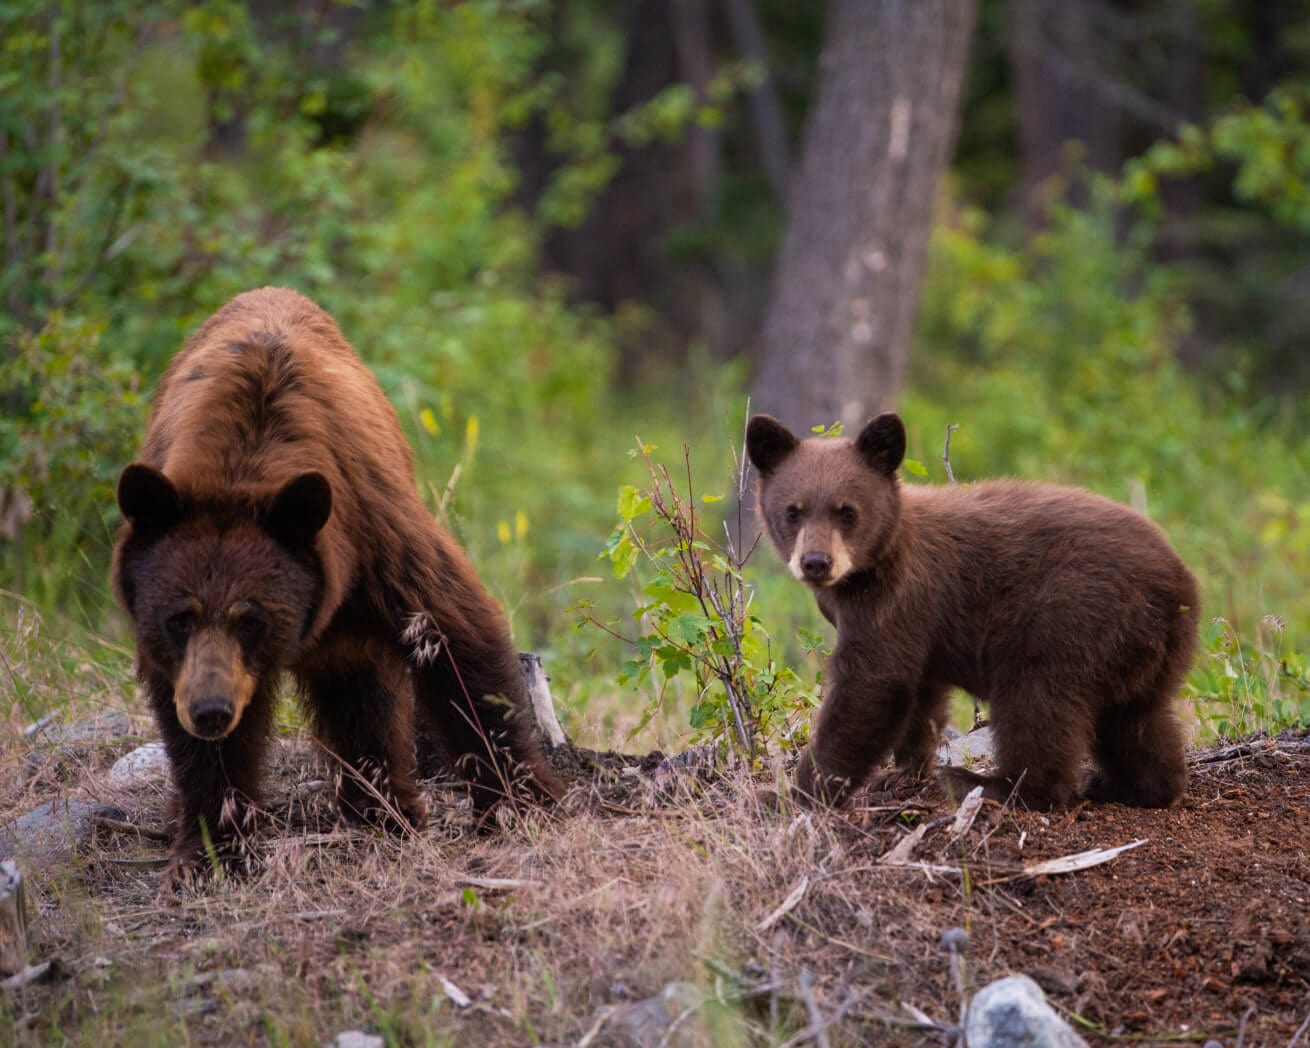 Bears in the forests